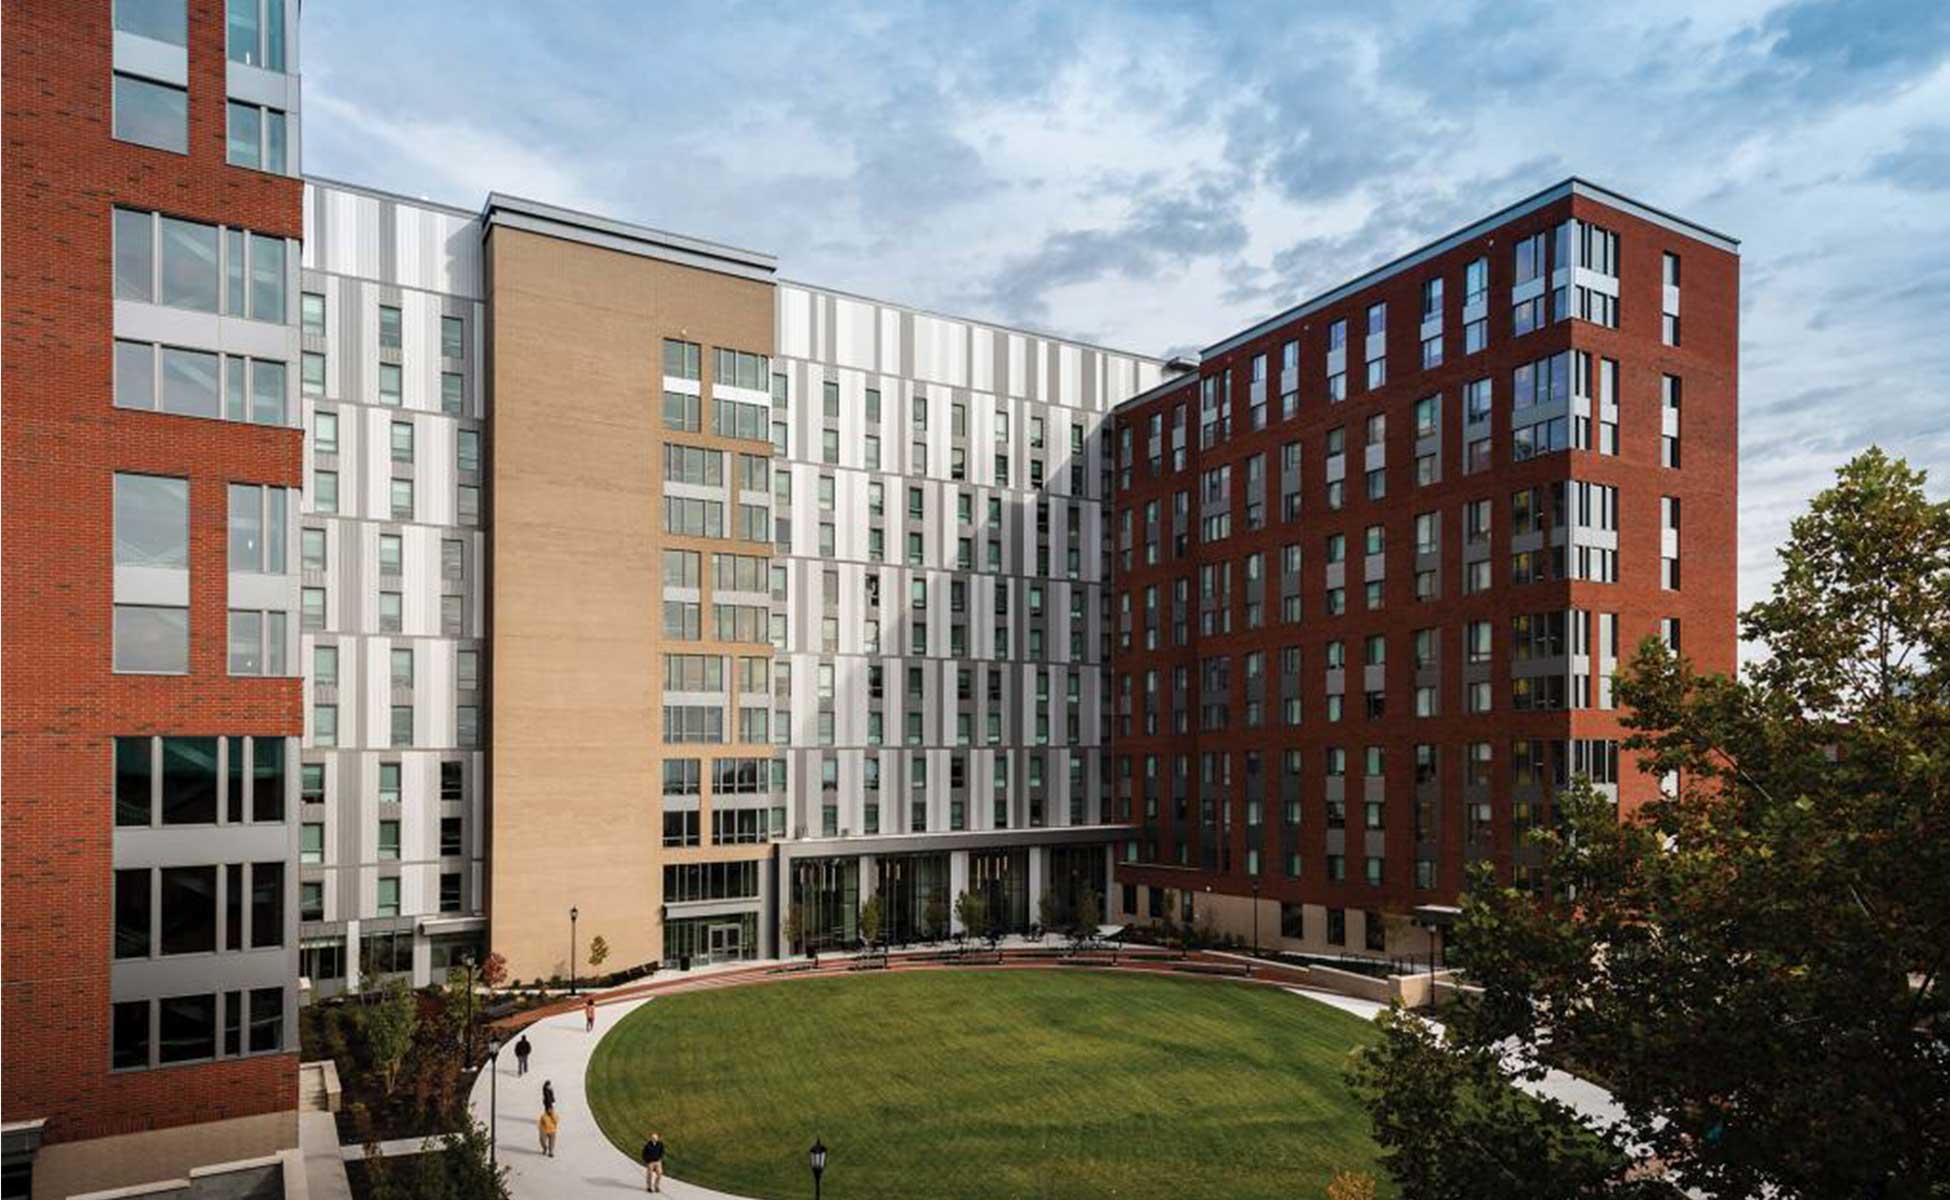 Chewning + Wilmer Provide Electric Installation for VCU Dorm